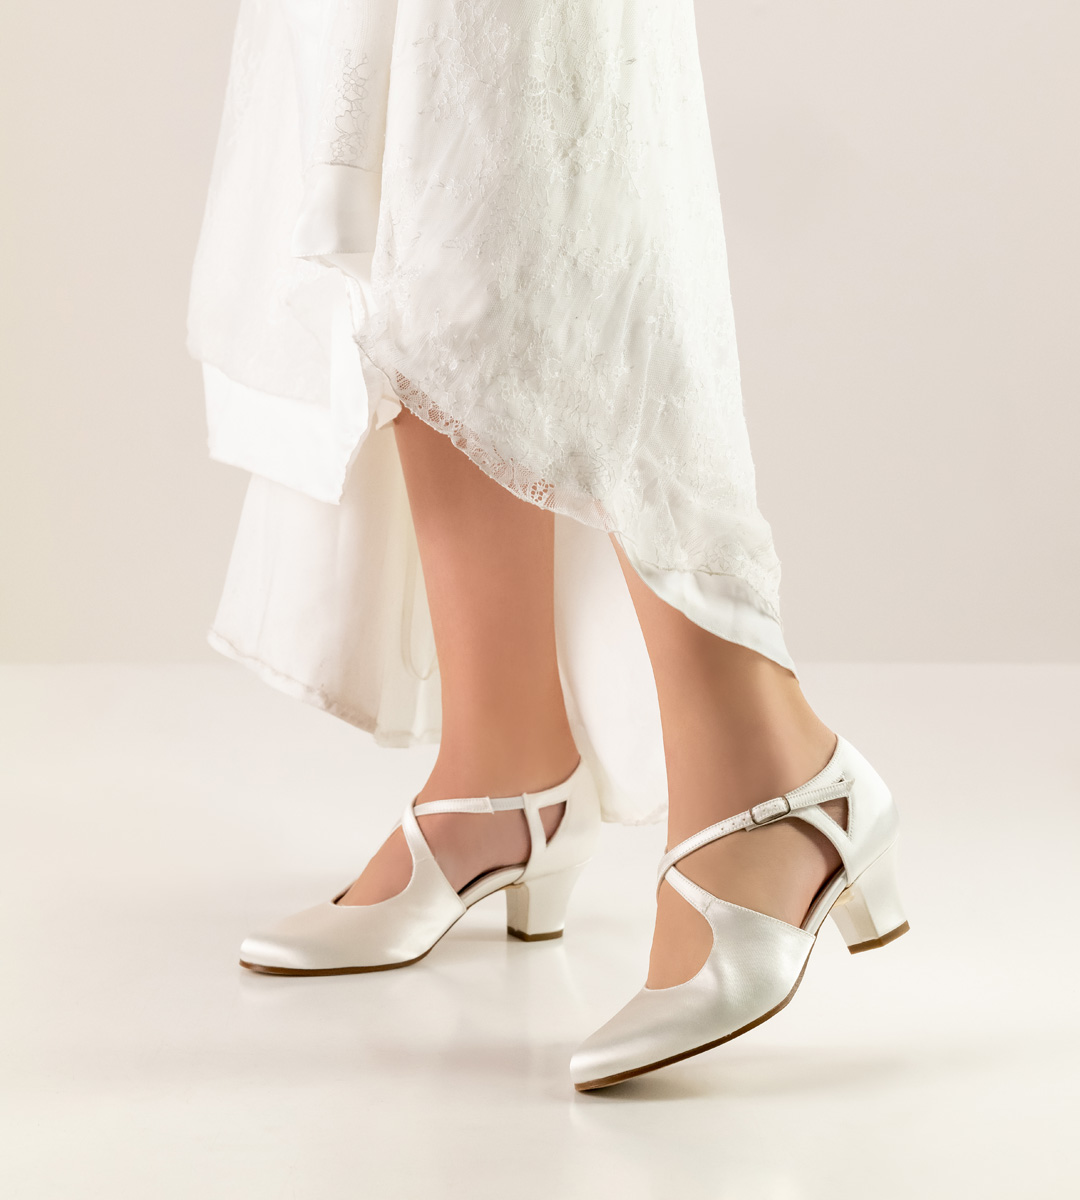 Werner Kern closed bridal shoe with leather sole in combination with white wedding dress